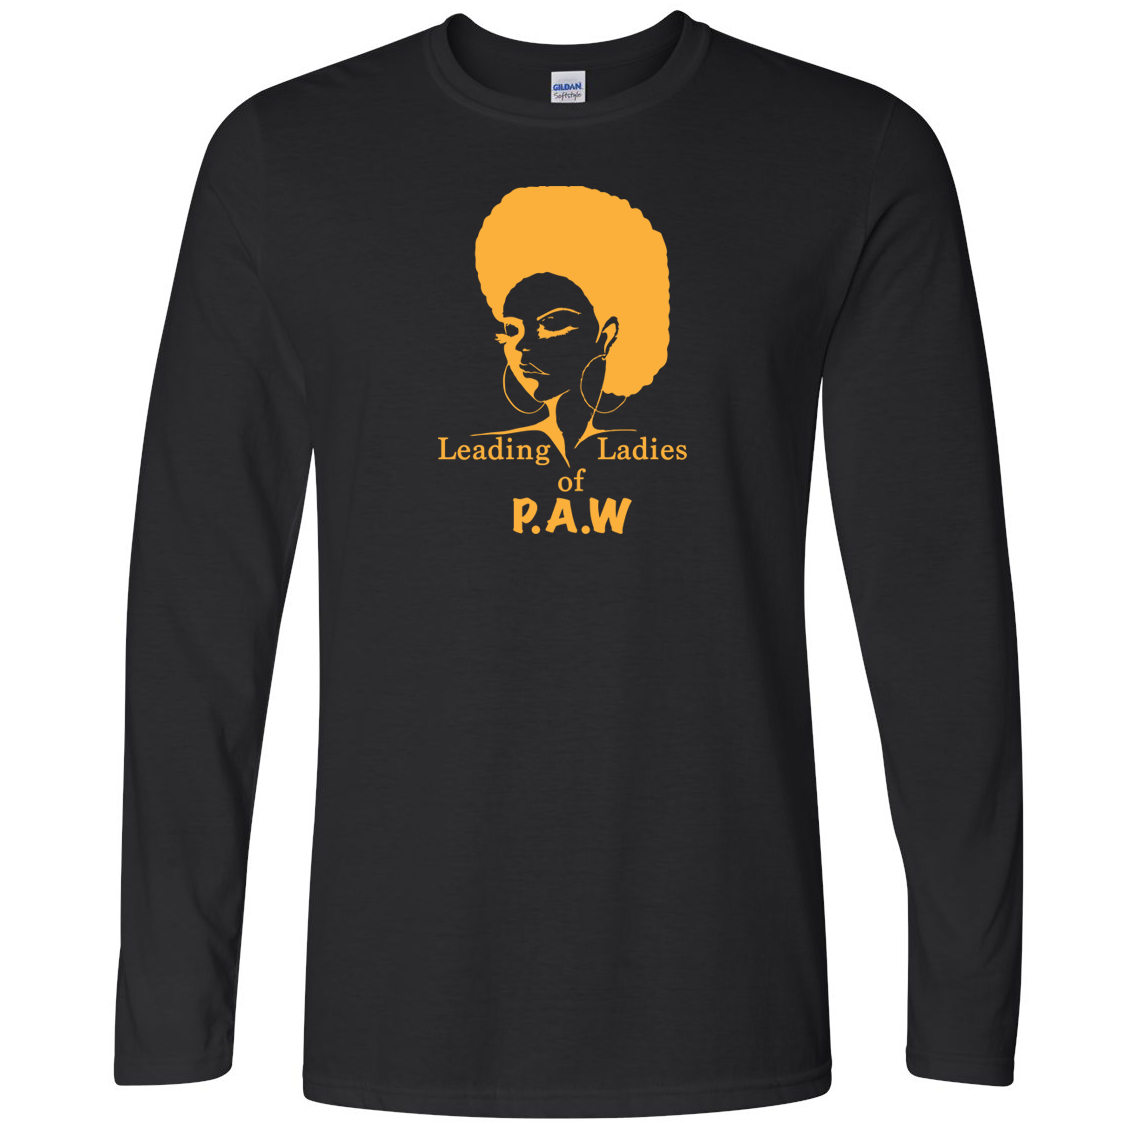 Leading Ladies of P.A.W. Softstyle Long Sleeve